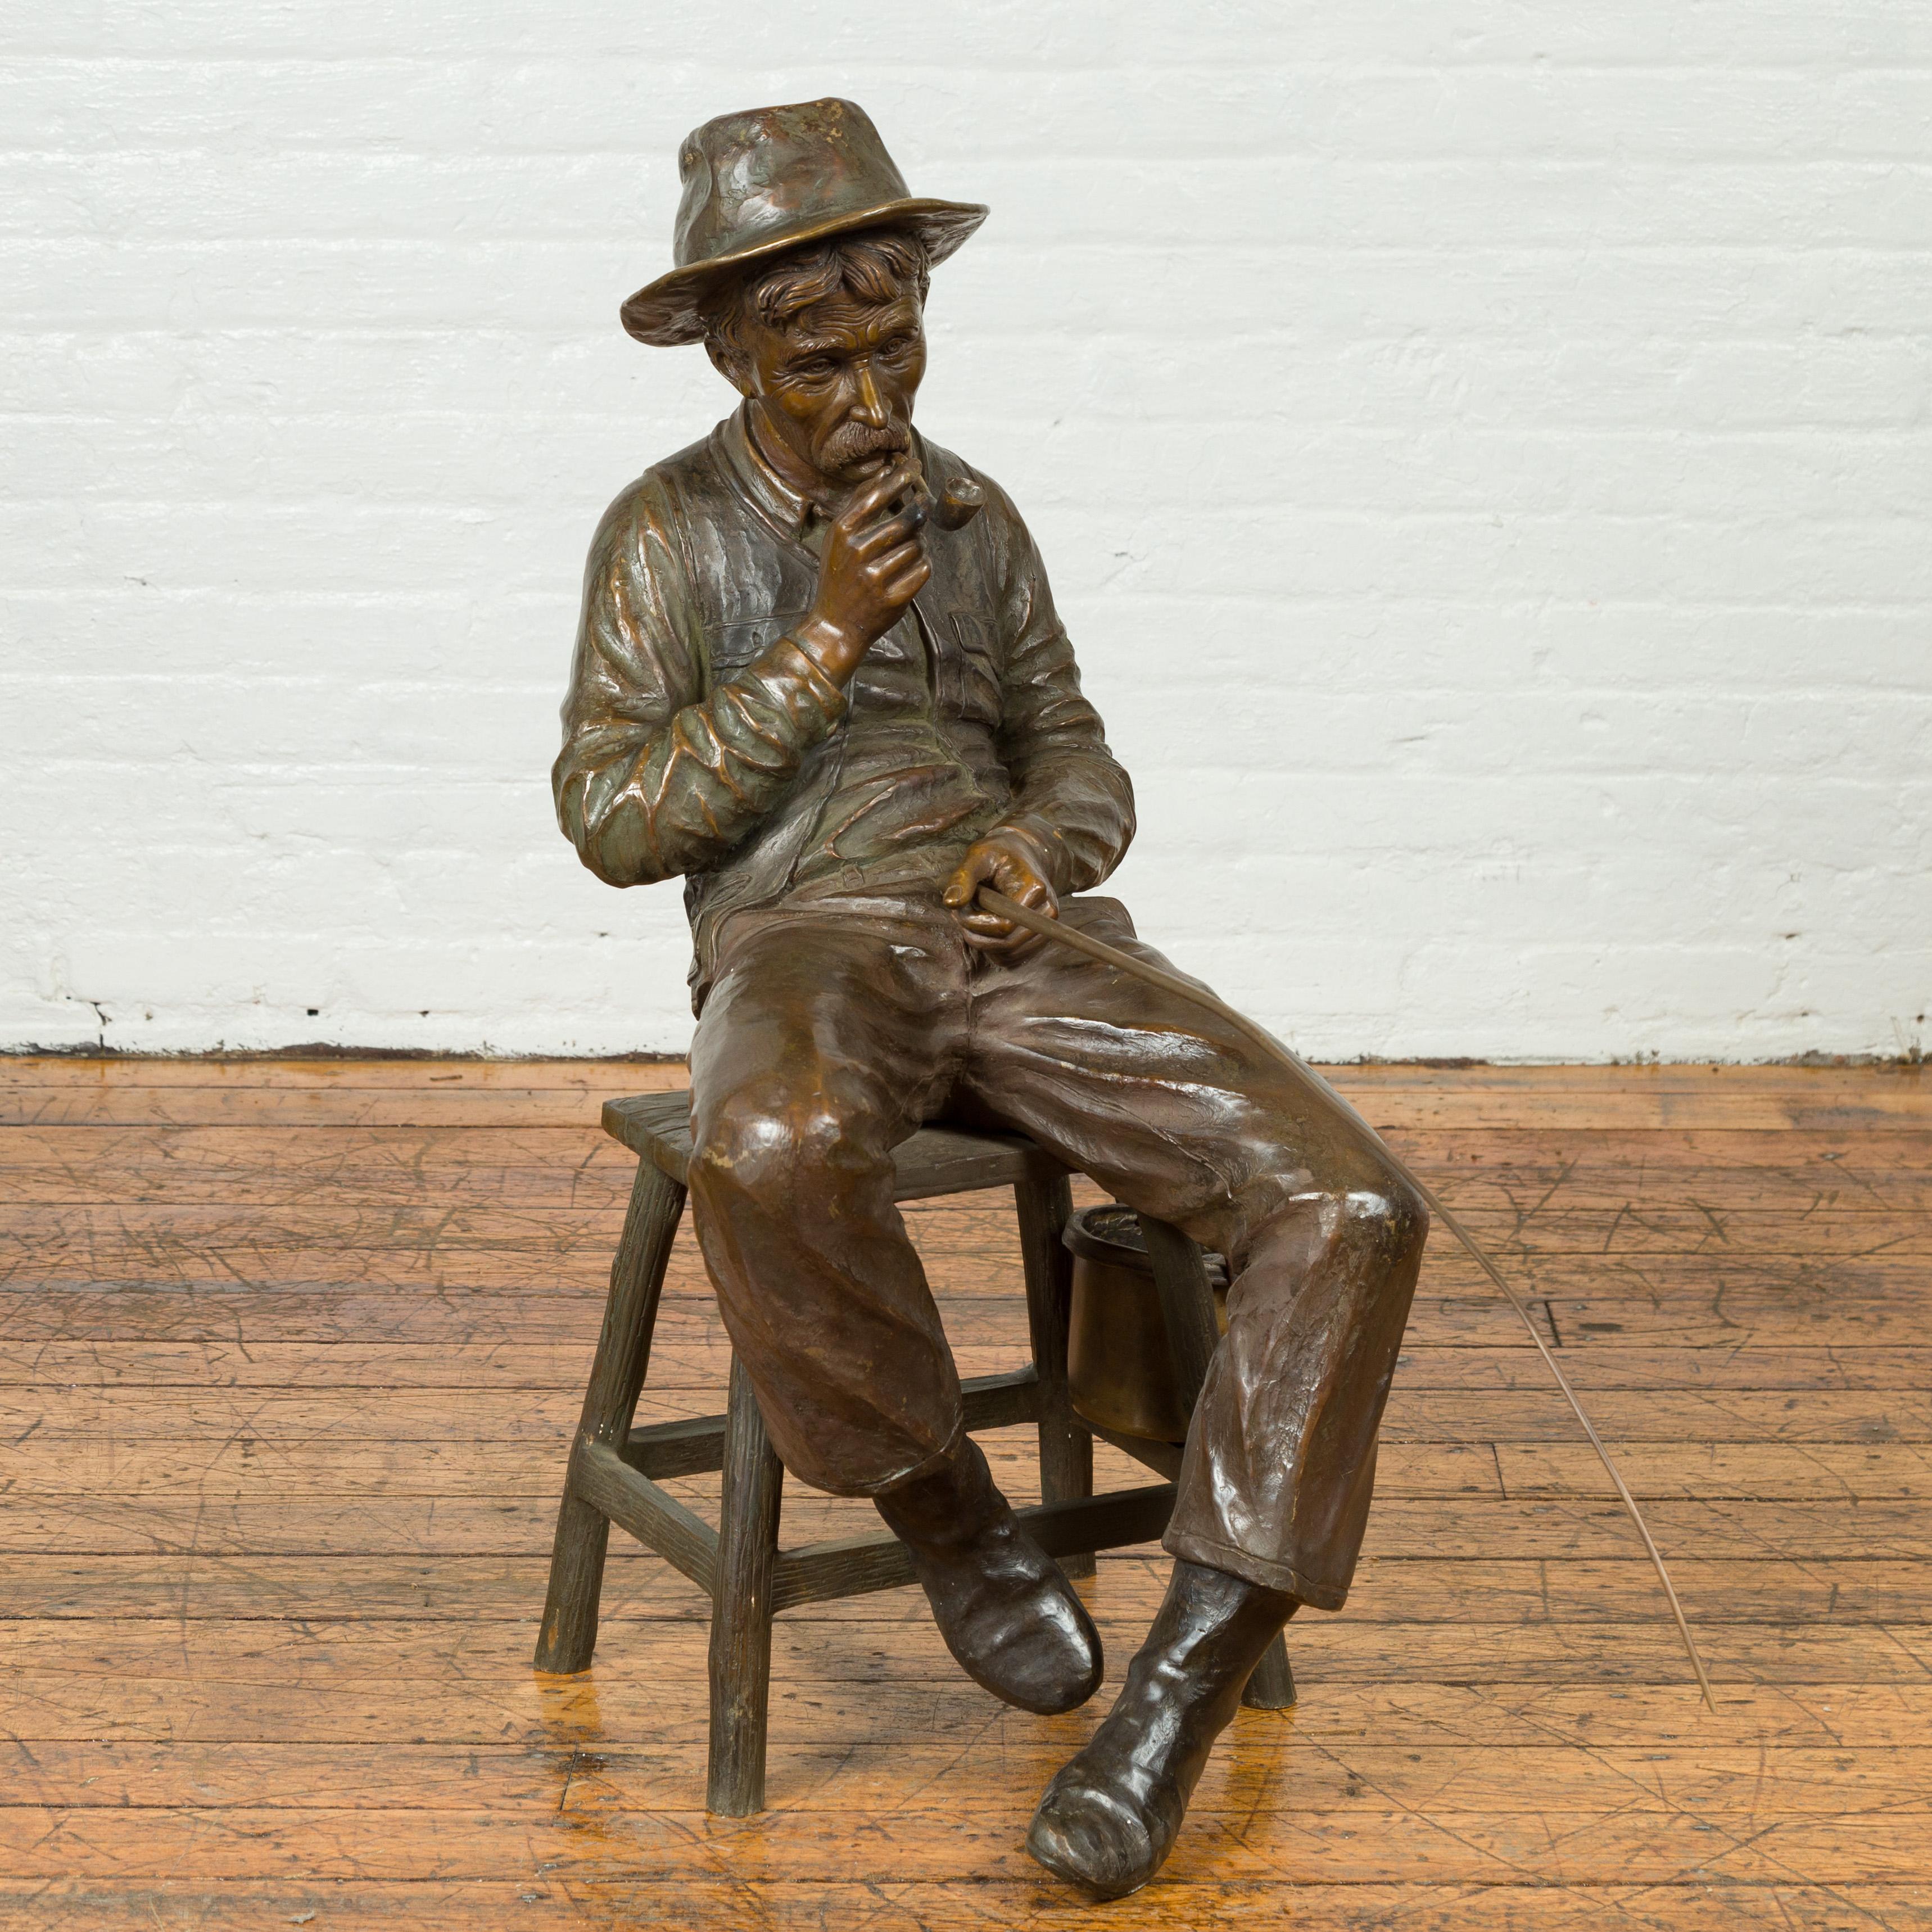 A vintage bronze sculpture of an old timer smoking his pipe and fishing. Perfect to be placed in a garden, this 20th century bronze sculpture will bring a heartwarming presence to any setting. A man, smoking his pipe and sitting on a rustic stool,